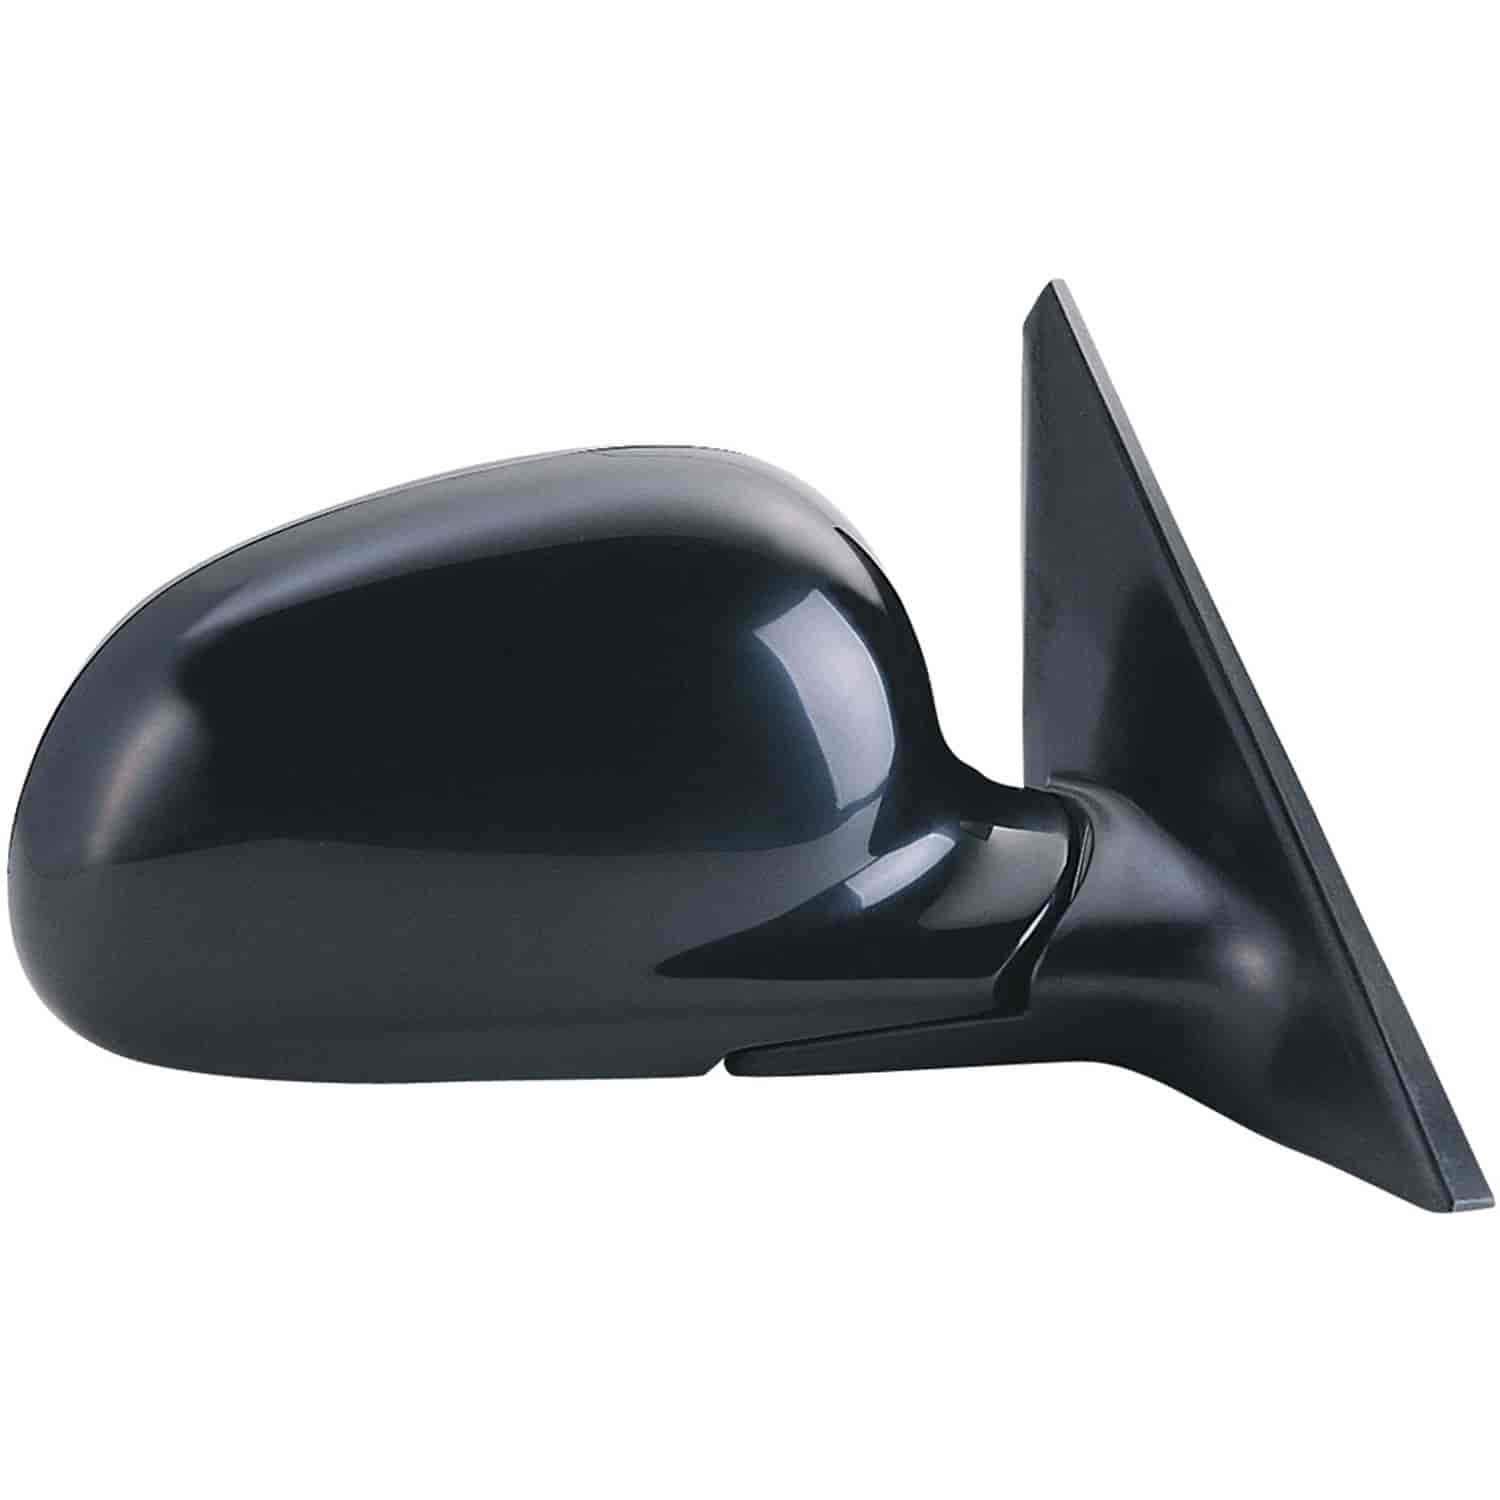 OEM Style Replacement mirror for 92-95 Honda Civic 4 door Sedan passenger side mirror tested to fit